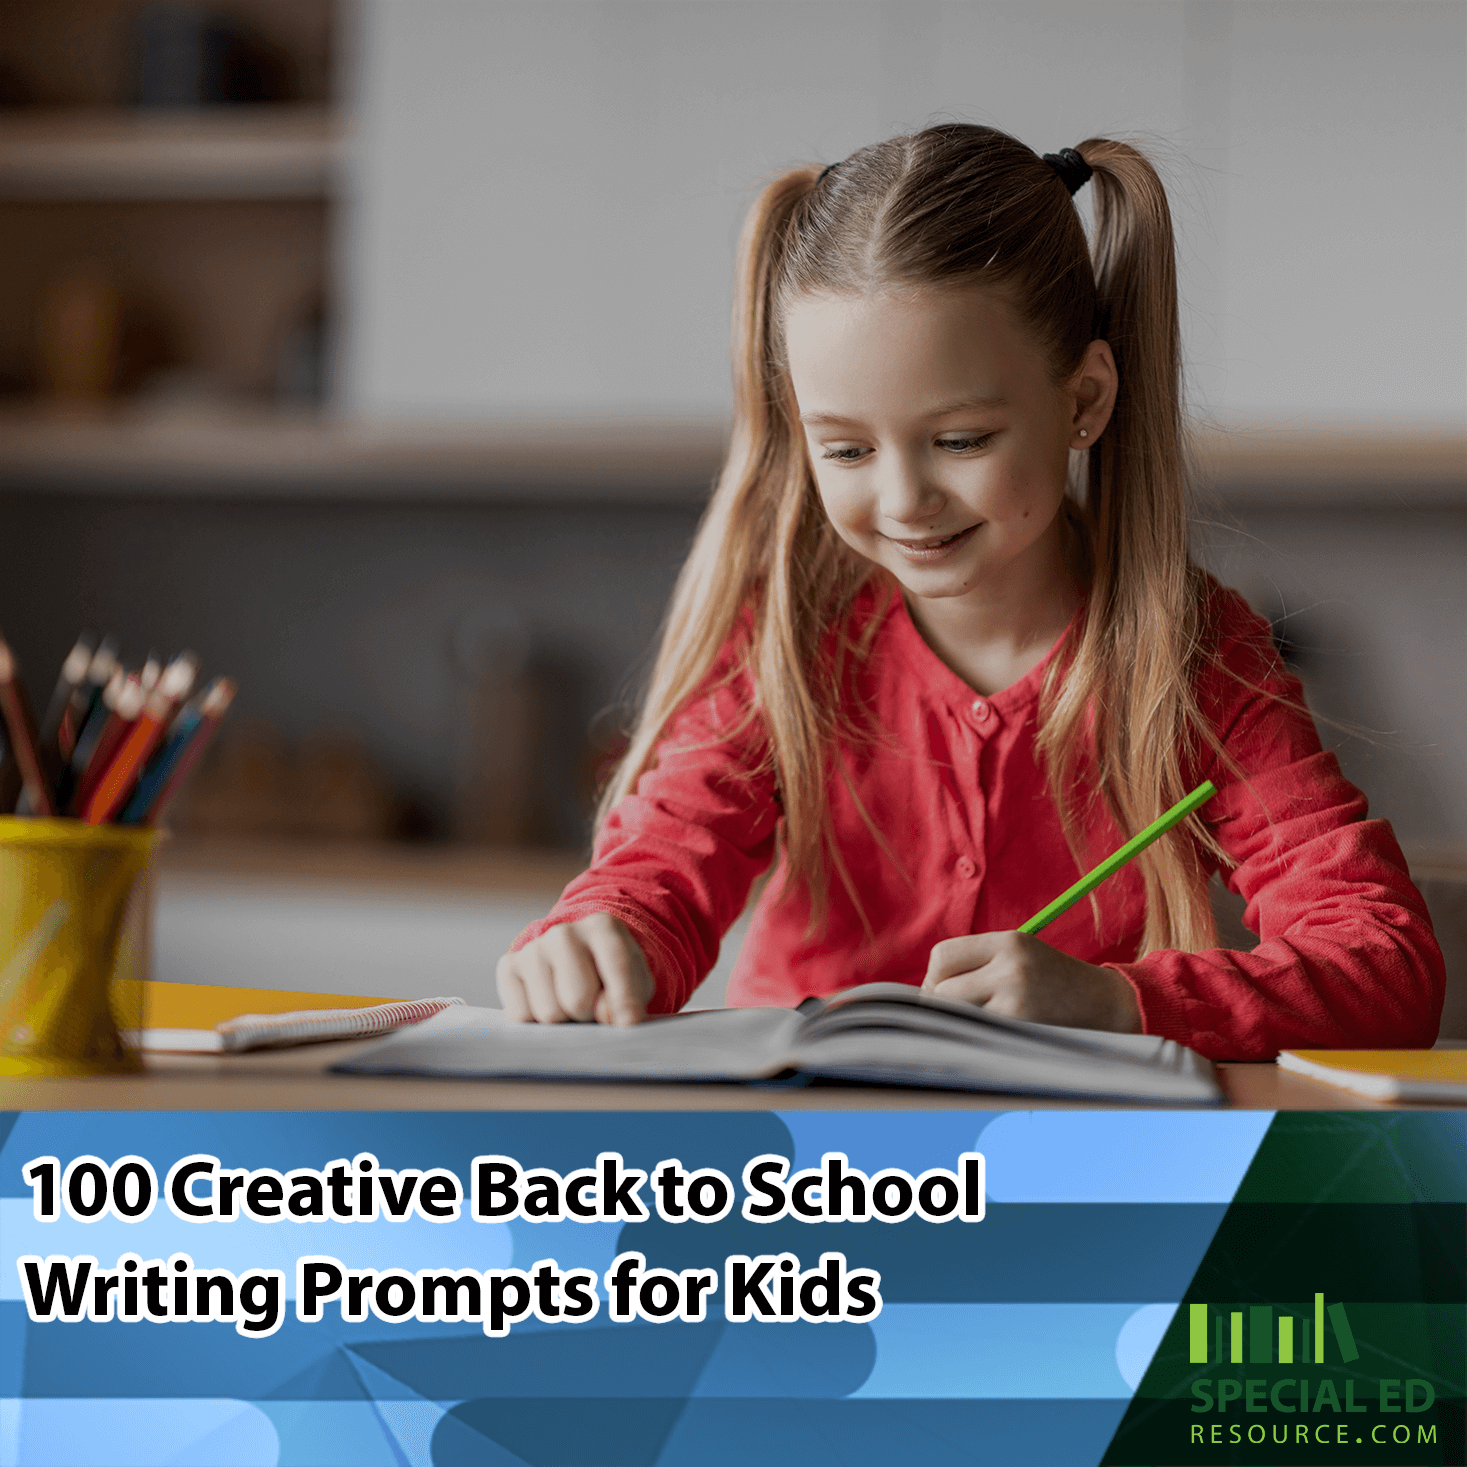 Young girl with pigtails writing in a notebook, smiling, and holding a green pencil. Text on the image reads '100 Creative Back to School Writing Prompts for Kids,' with the Special Ed Resource logo in the corner.